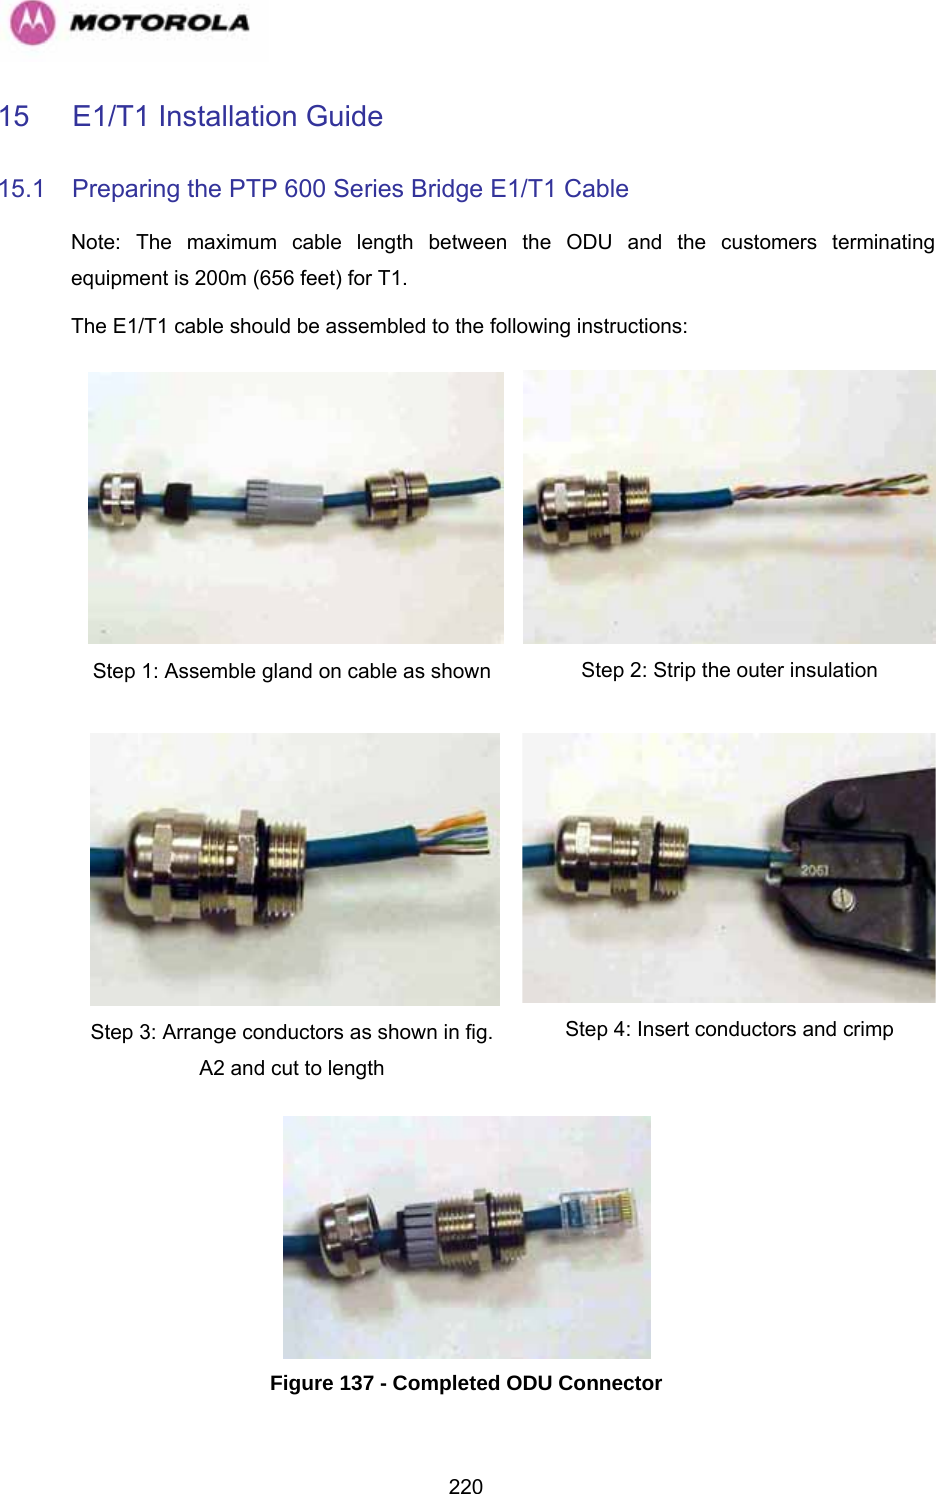   22015 E1/T1 Installation Guide 15.1  Preparing the PTP 600 Series Bridge E1/T1 Cable Note: The maximum cable length between the ODU and the customers terminating equipment is 200m (656 feet) for T1. The E1/T1 cable should be assembled to the following instructions: Step 1: Assemble gland on cable as shown  Step 2: Strip the outer insulation Step 3: Arrange conductors as shown in fig. A2 and cut to length Step 4: Insert conductors and crimp  Figure 137 - Completed ODU Connector  